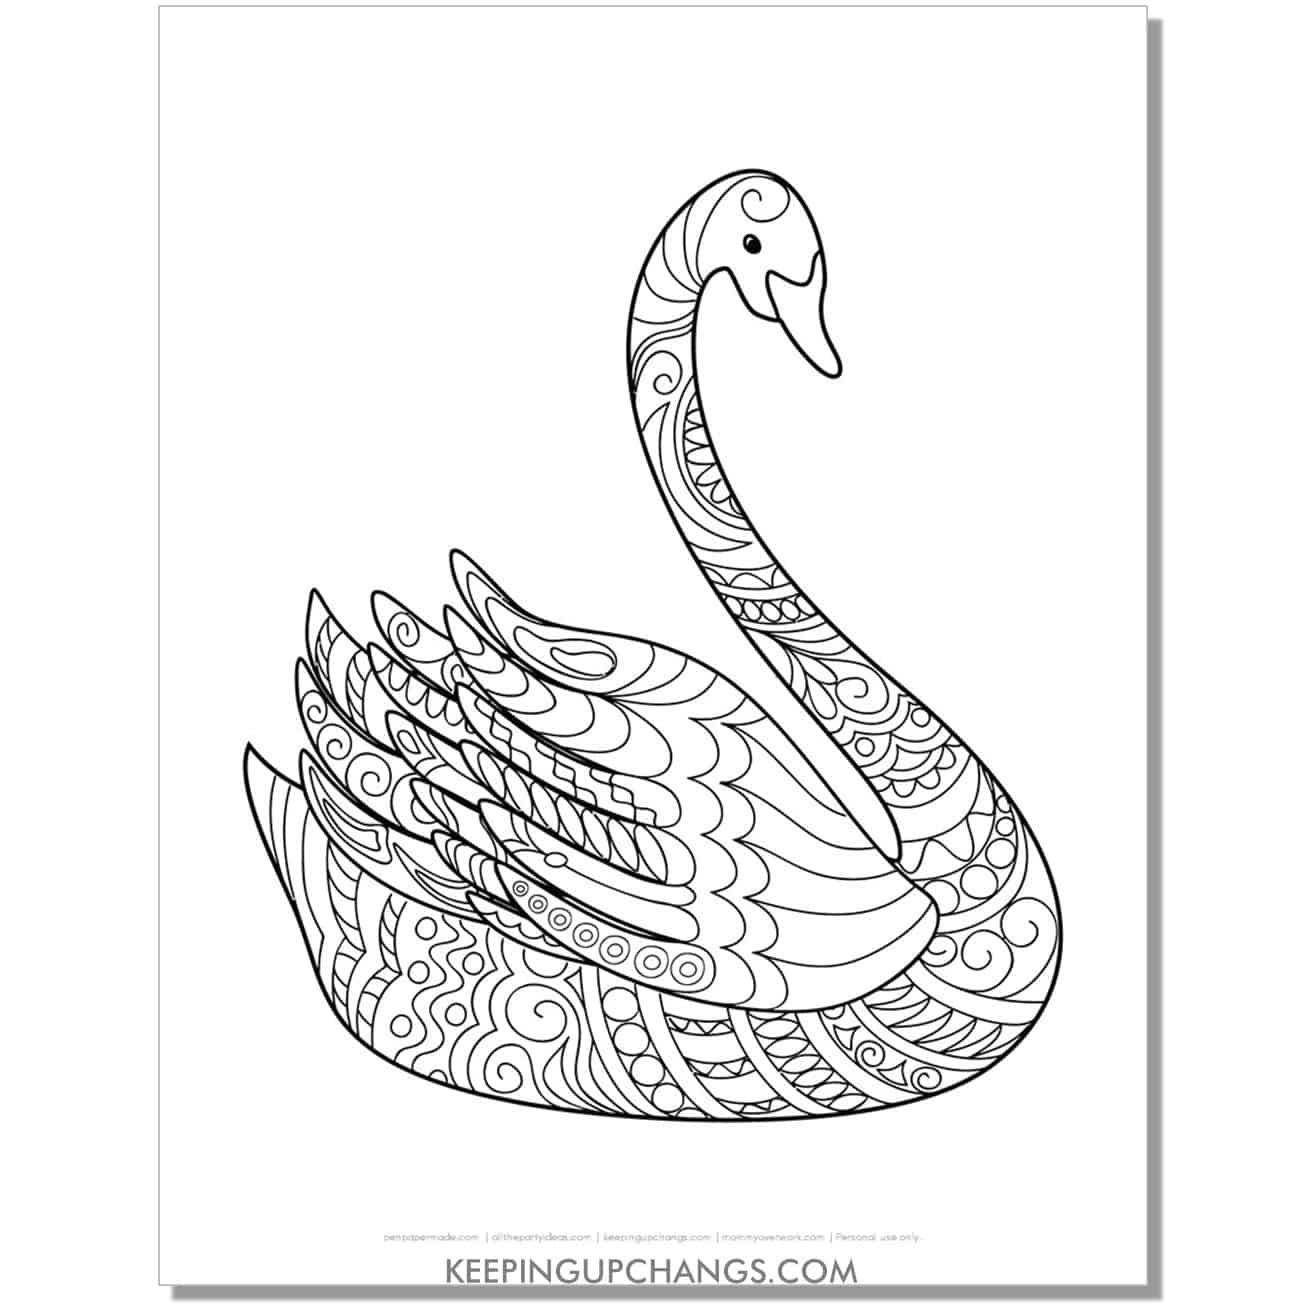 tundra swan coloring page.